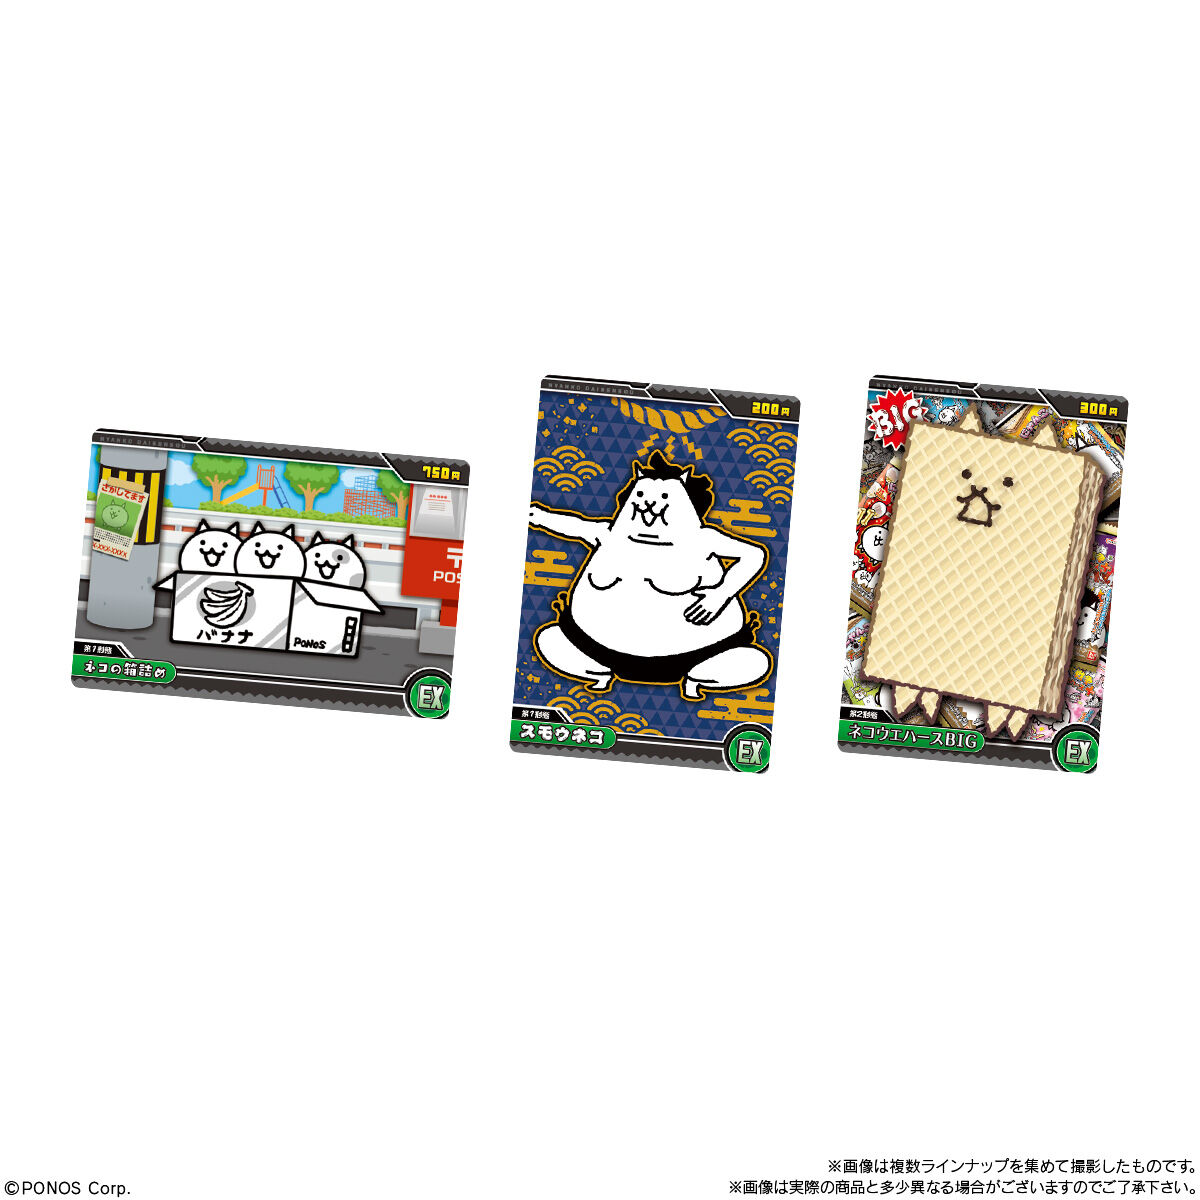 The Battle Cats Wafers Plus+ Vol.5-Single Pack (Random)-Bandai-Ace Cards &amp; Collectibles